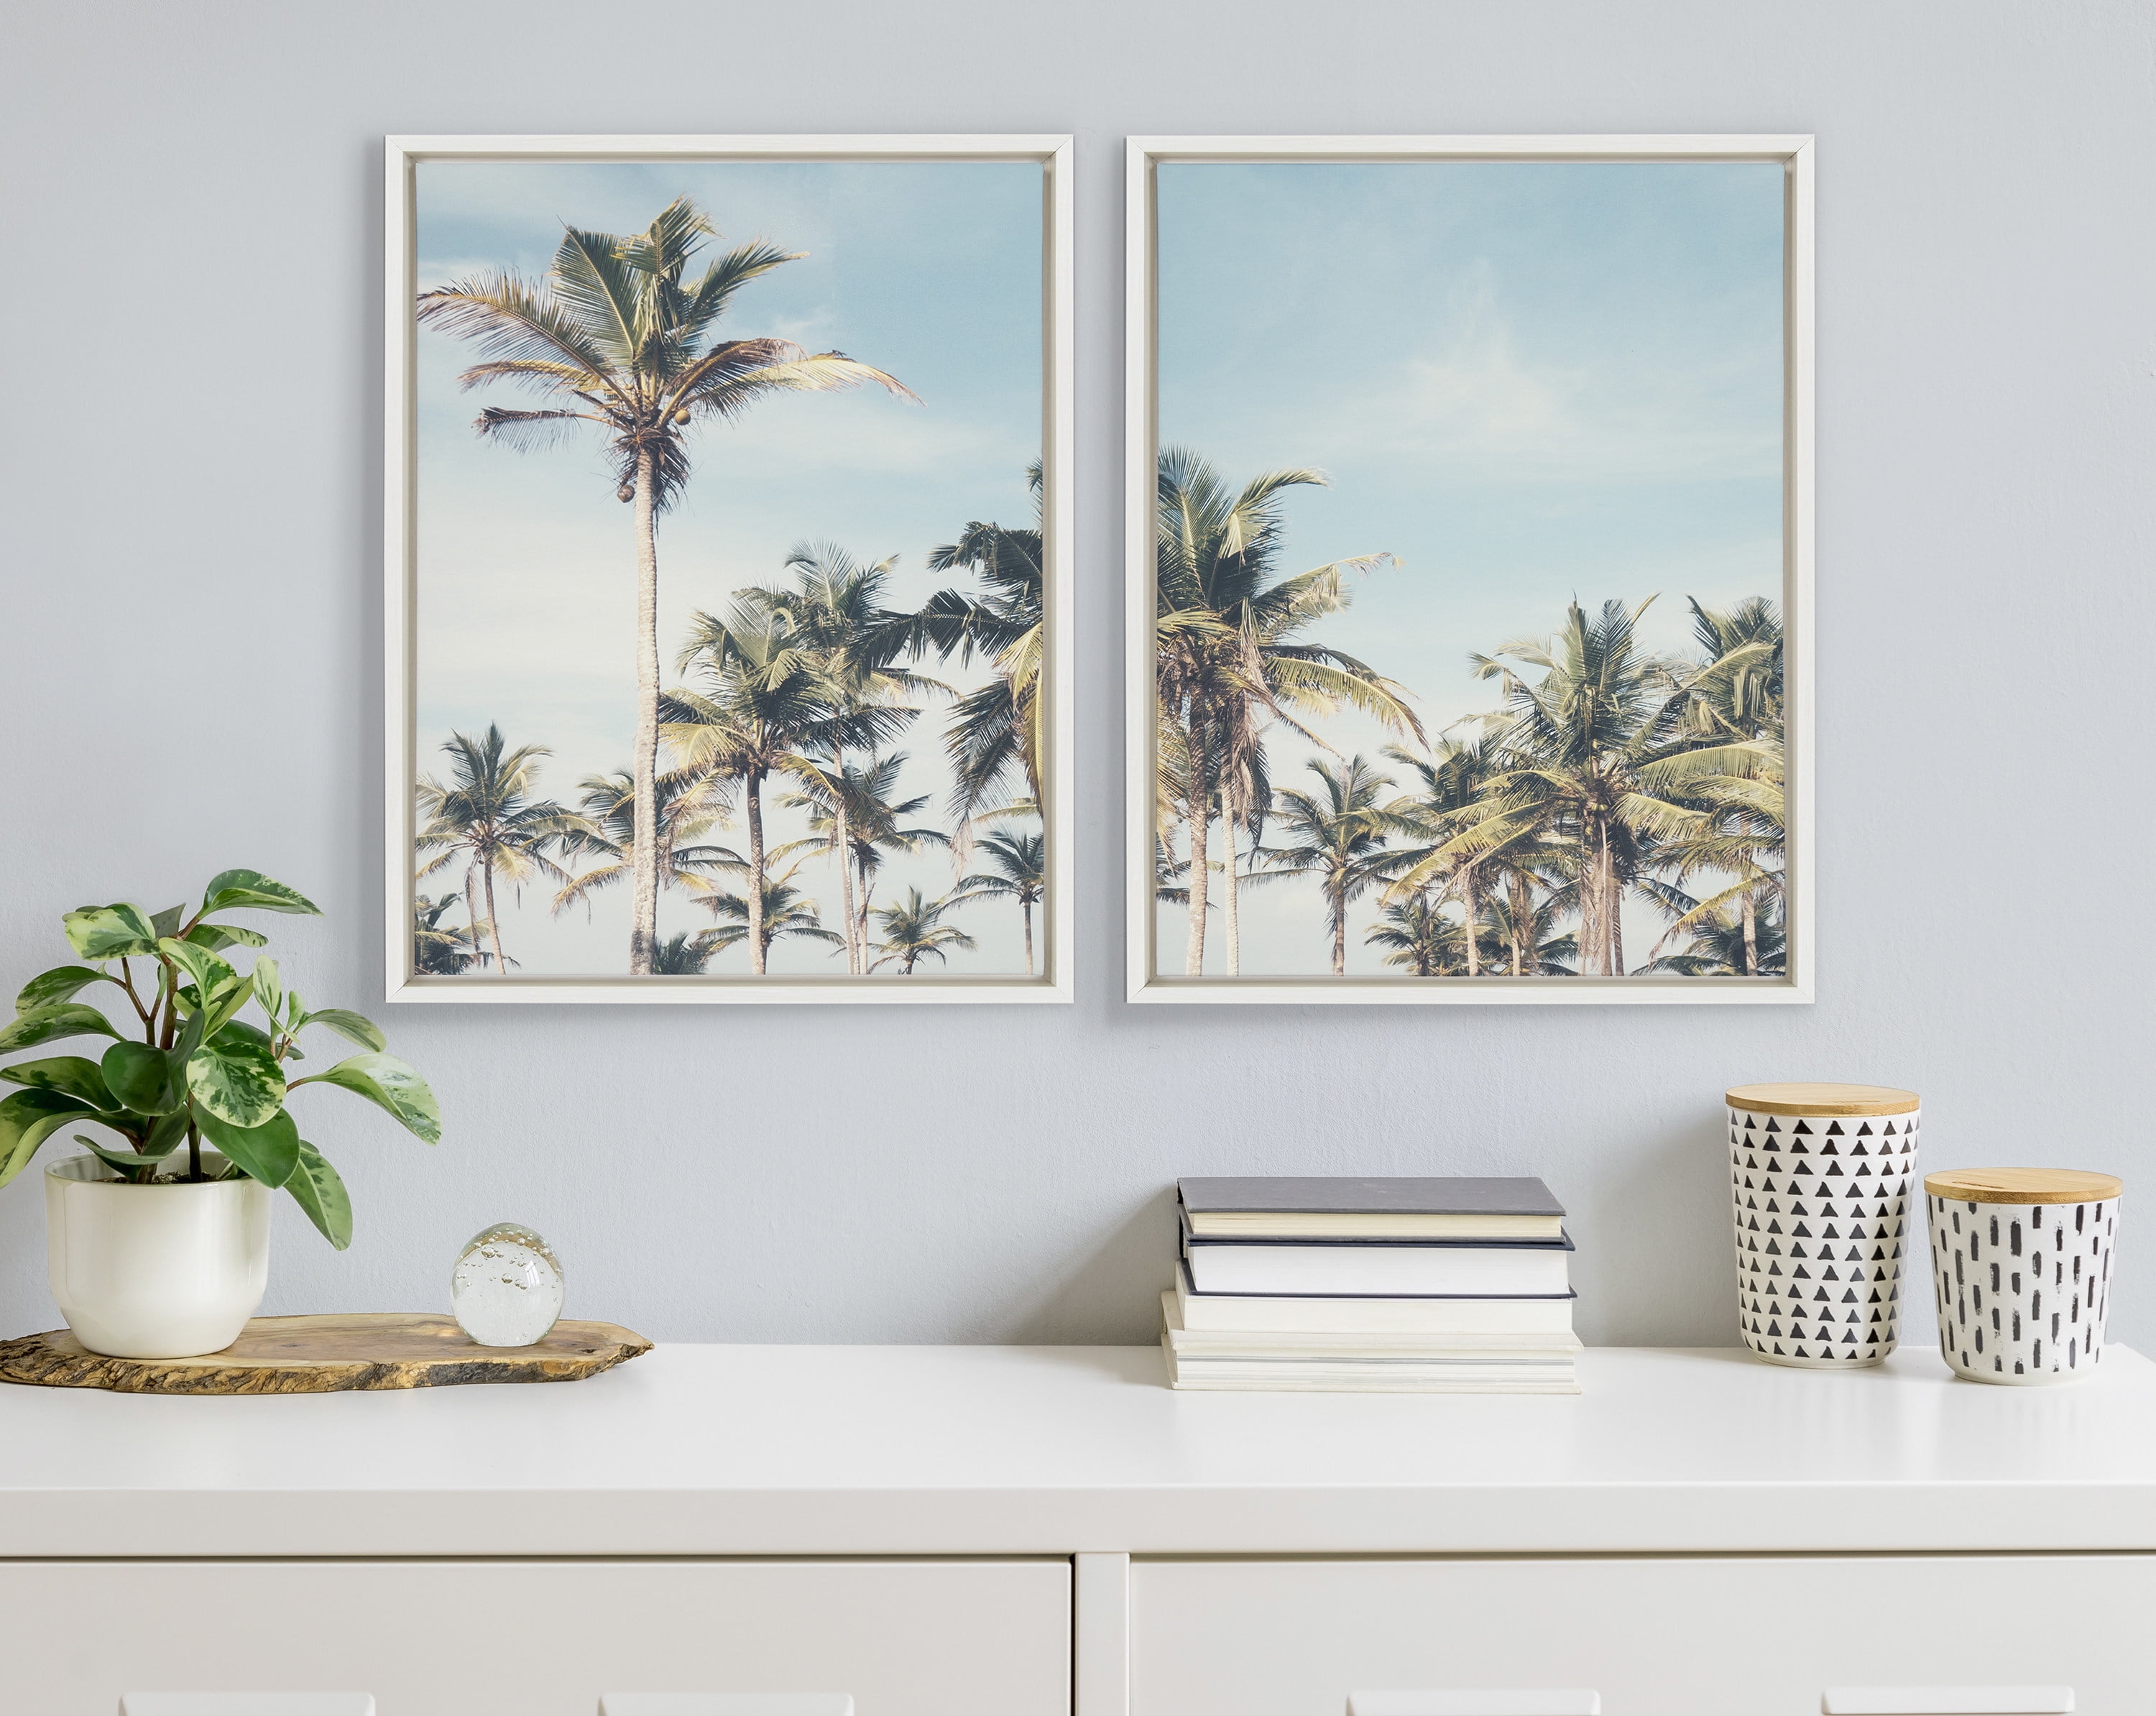 A Coconut Drink with Straw Sticking Out and Flowers on A Tropical Beach. | Large Solid-Faced Canvas Wall Art Print | Great Big Canvas